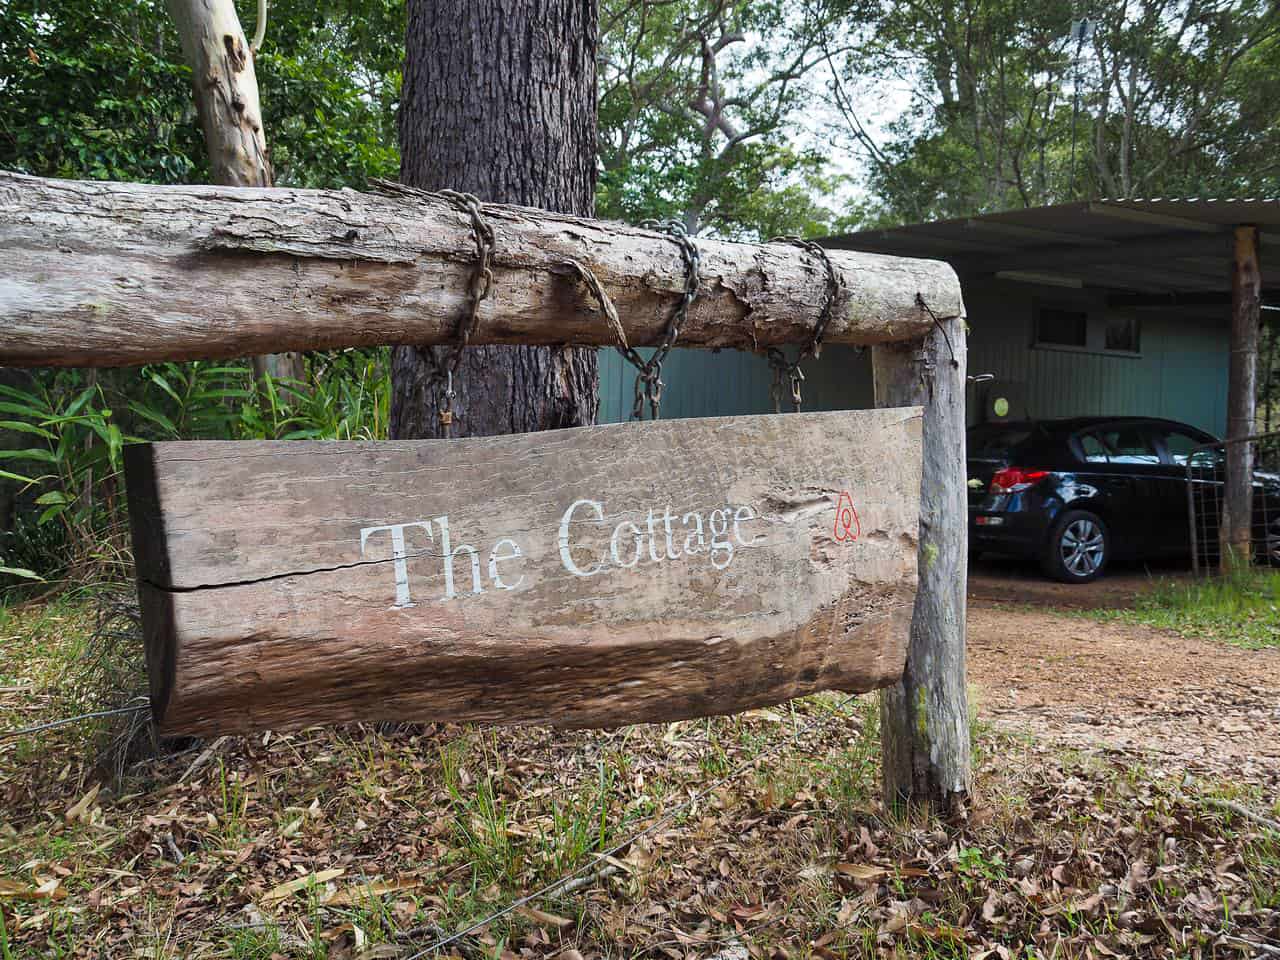 The cottage, accommodation in the Atherton Tablelands // Travel Mermaid